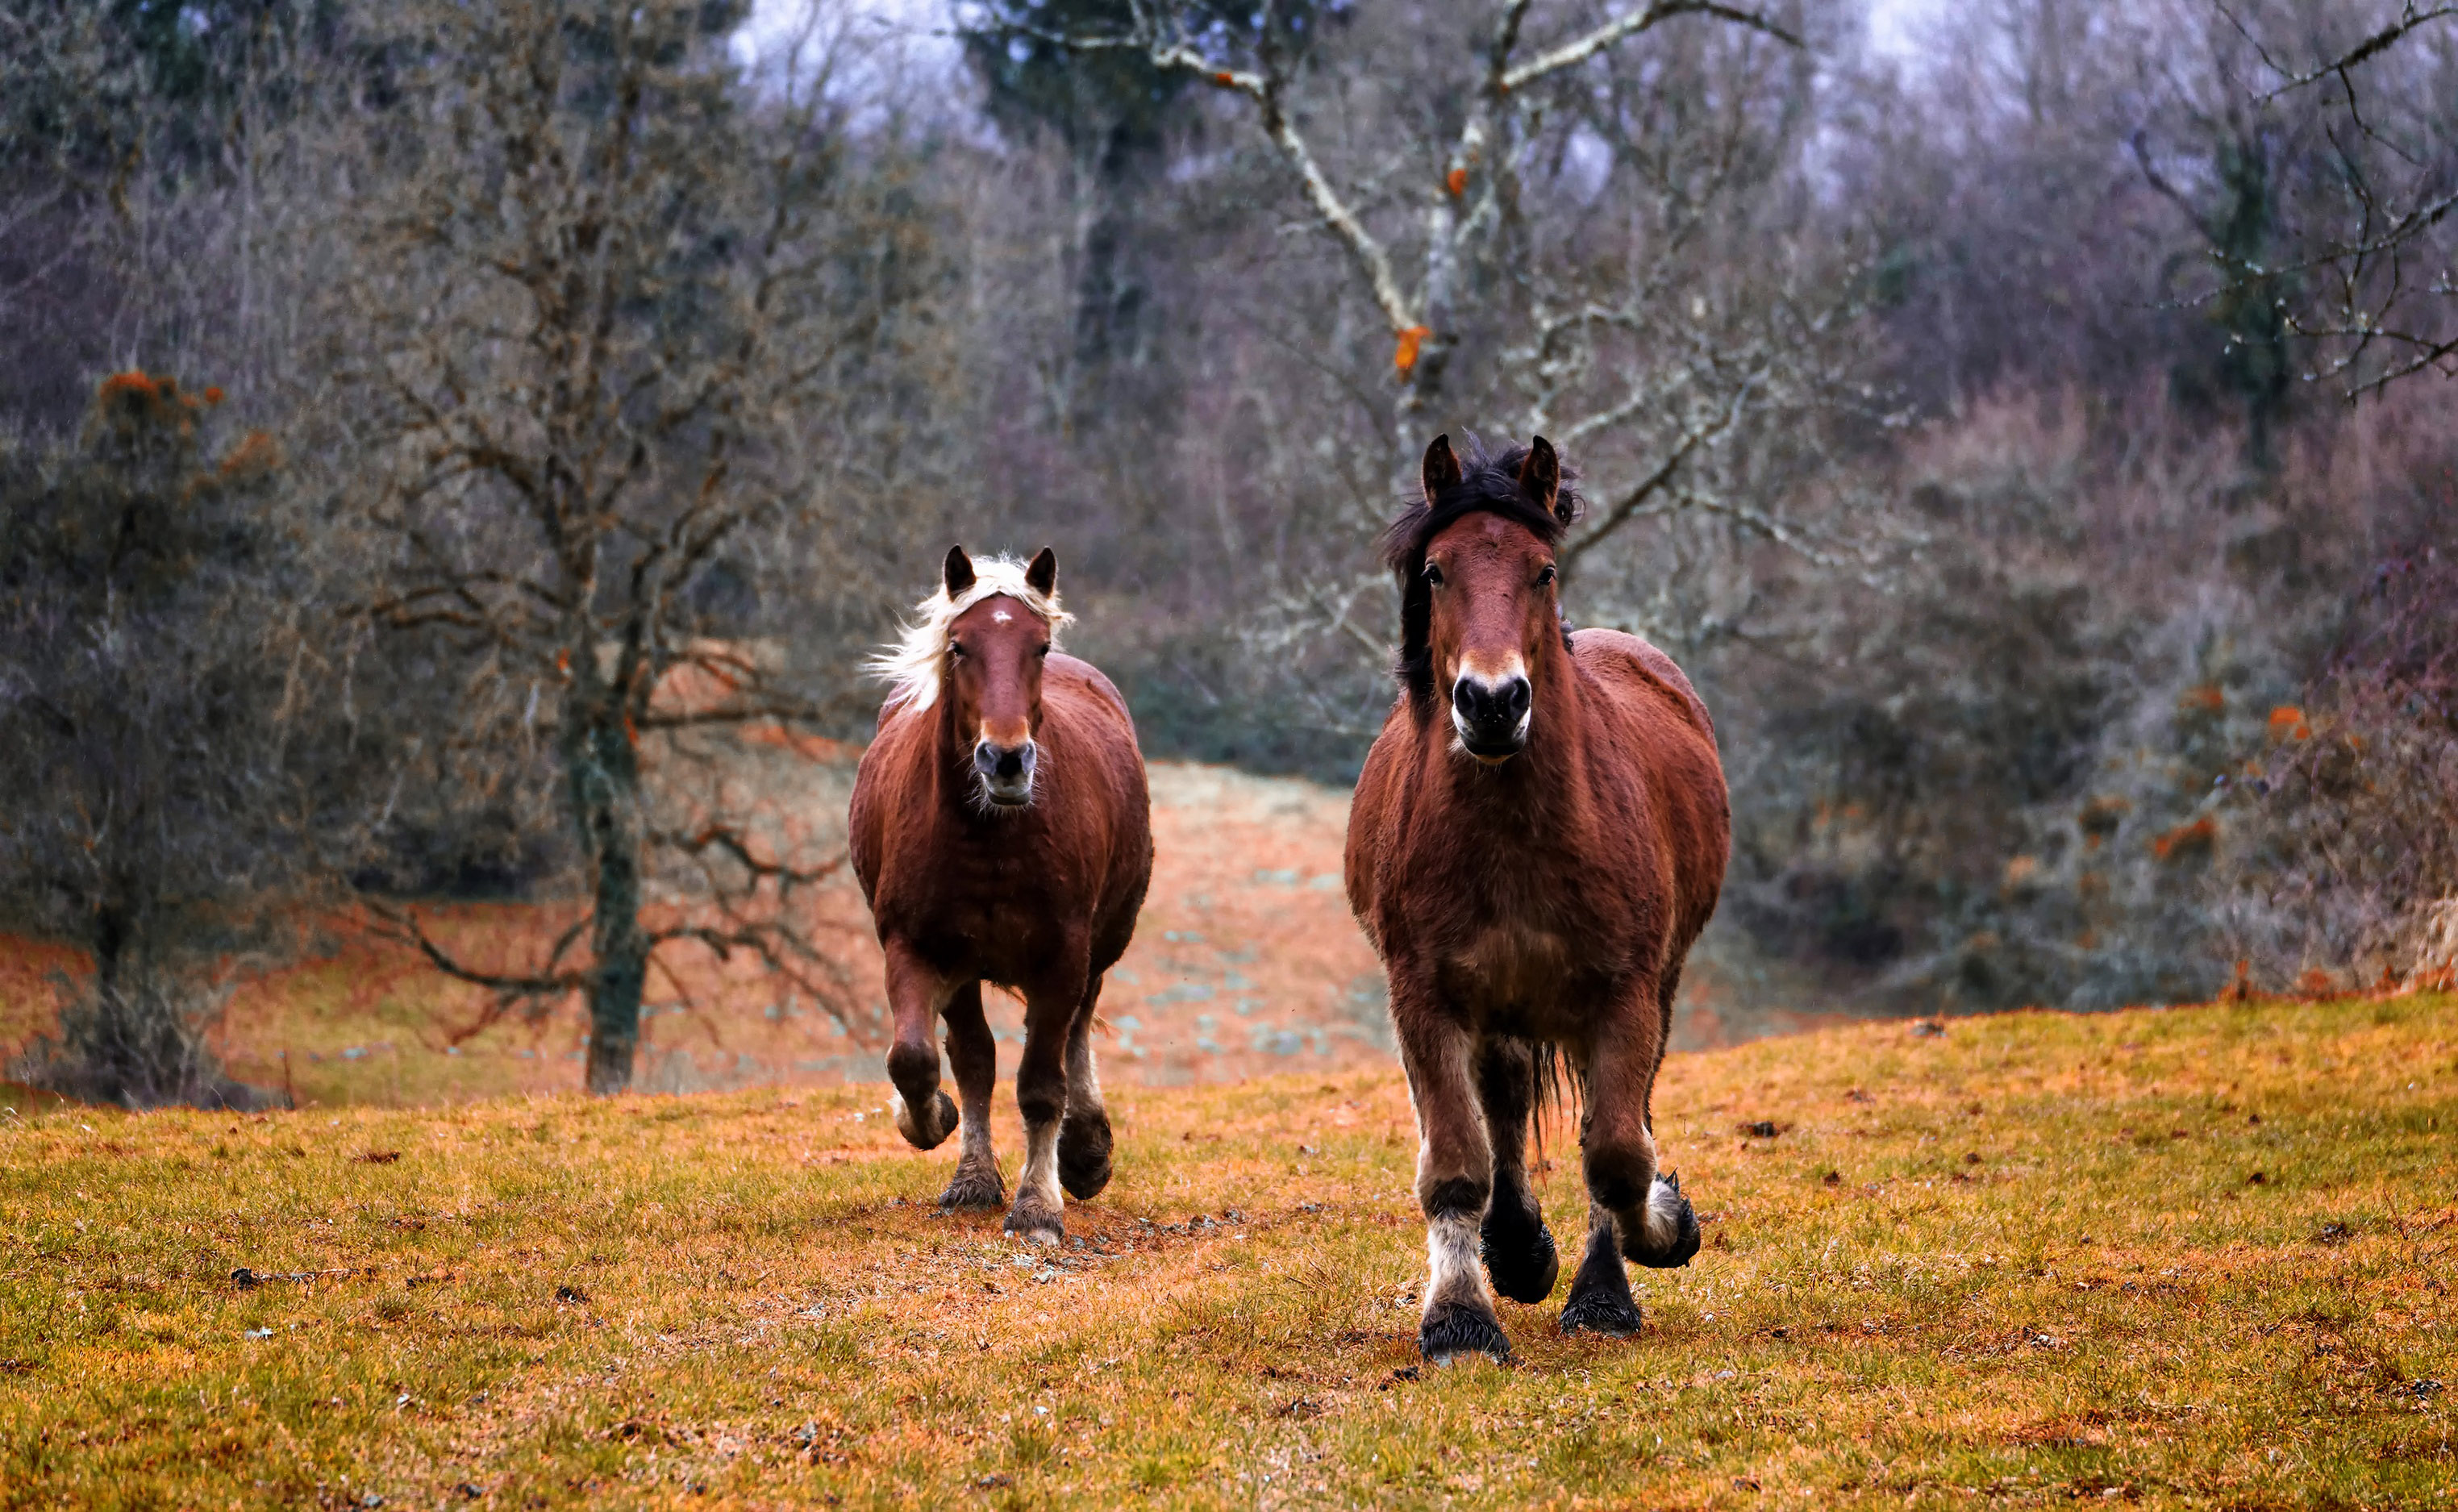 Two Horses Galloping out in the Wild image - Free stock photo ...